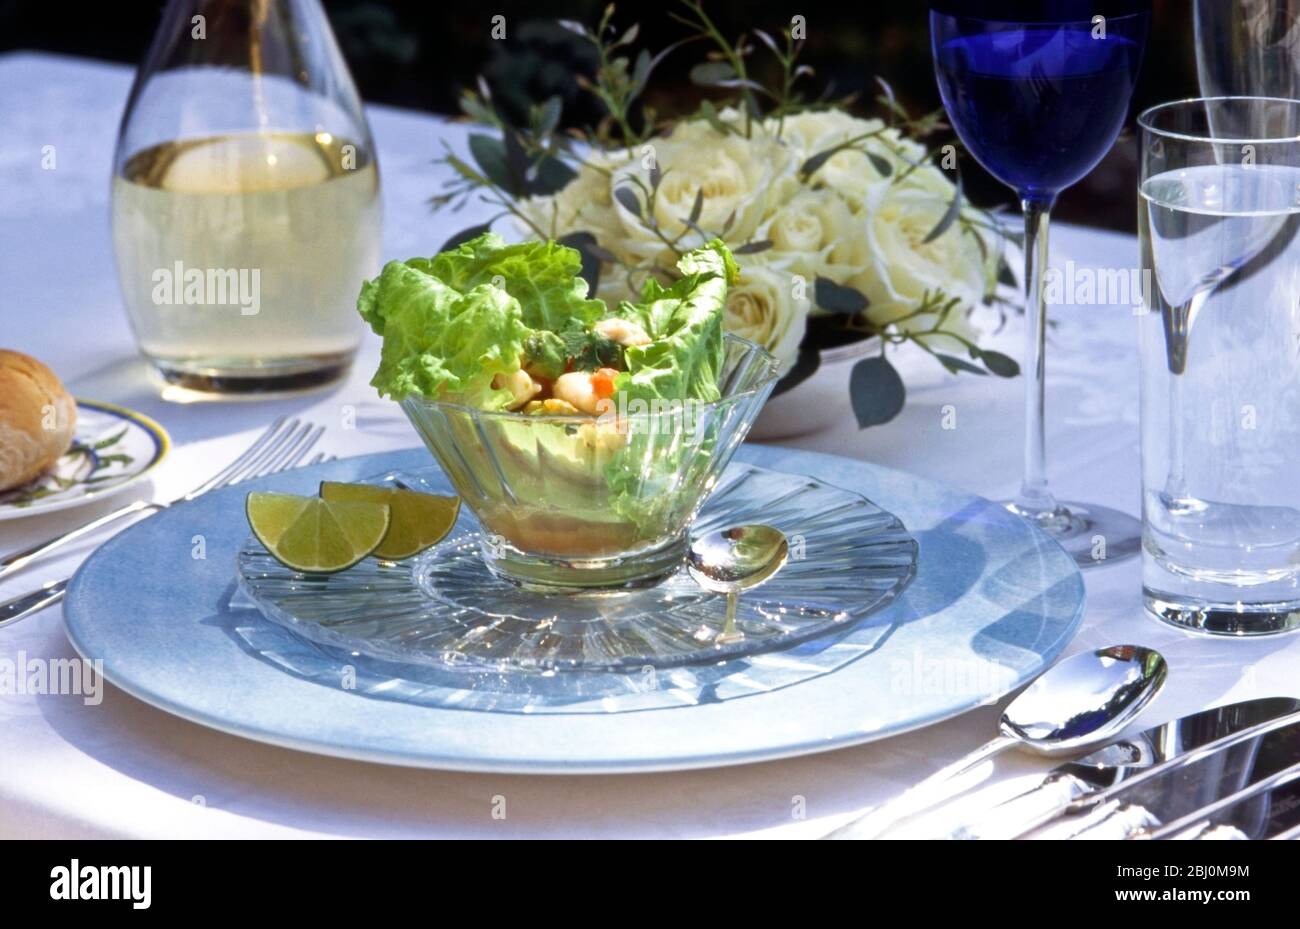 Seafood salad in crystal glass bowl in formal table setting outdoors - Stock Photo